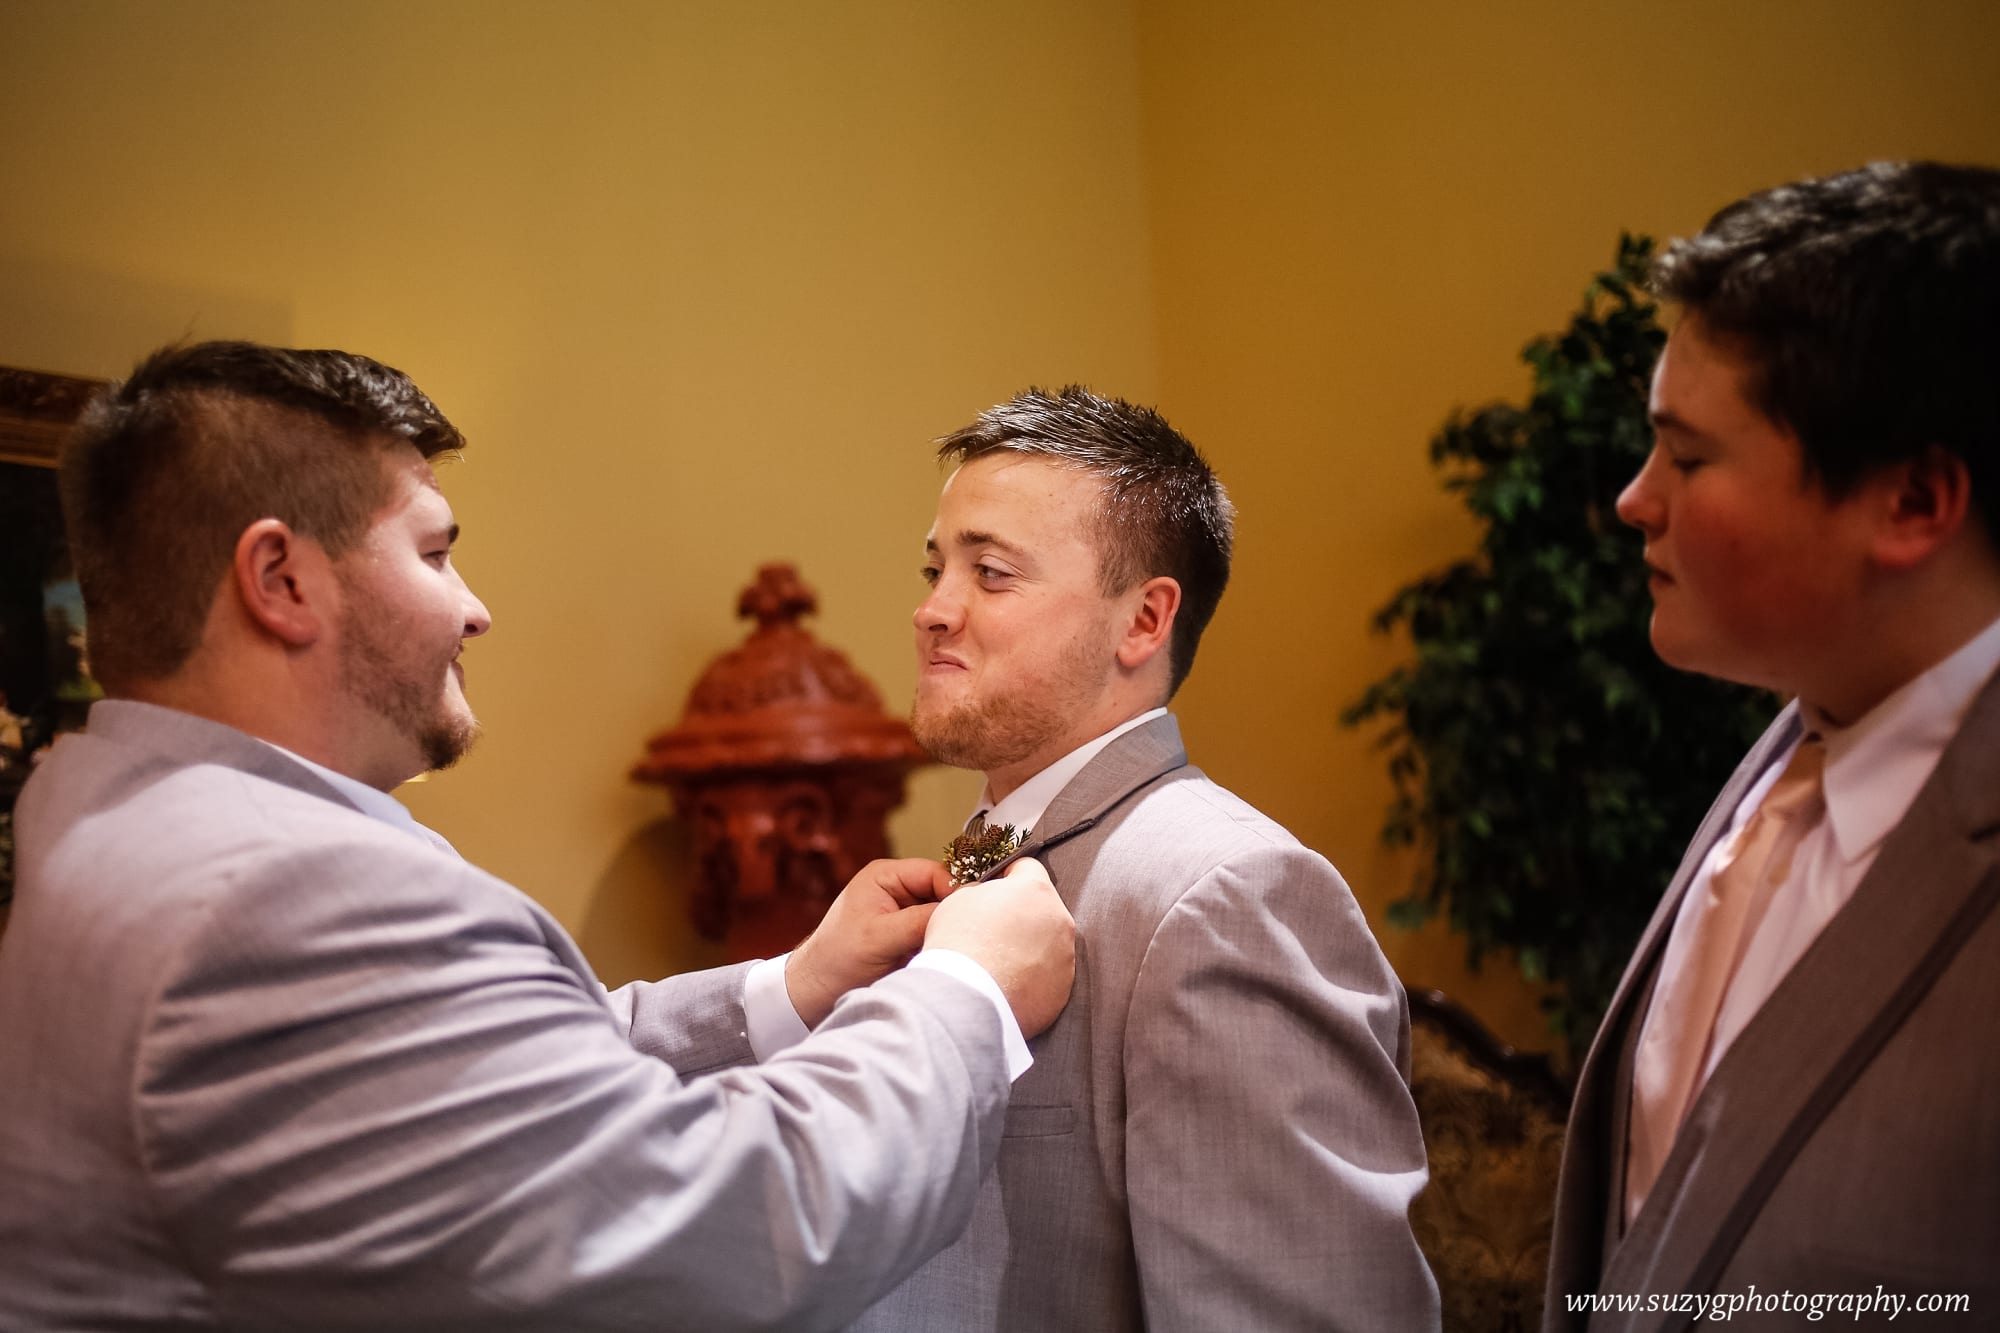 vows by victoria-lake charles-wedding-photography-suzy g-photography-suzygphotography_0014